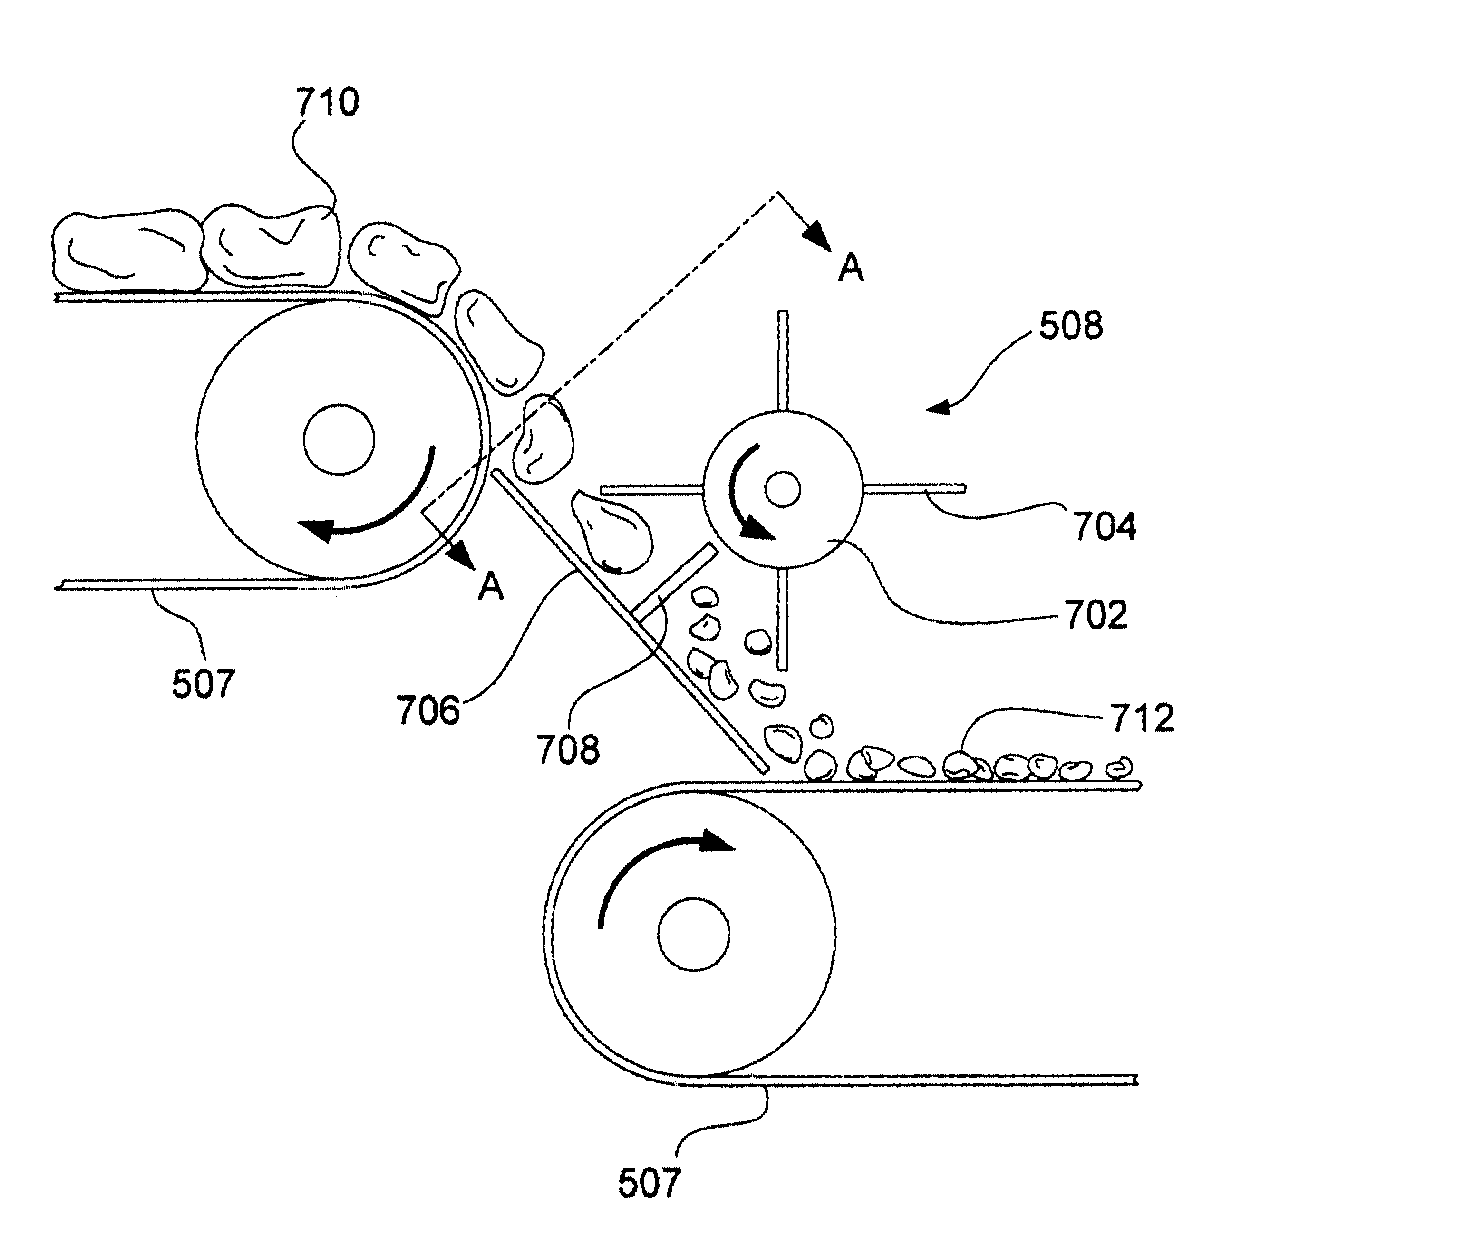 Method and Apparatus for Producing Cooked Bacon Using Starter Cultures